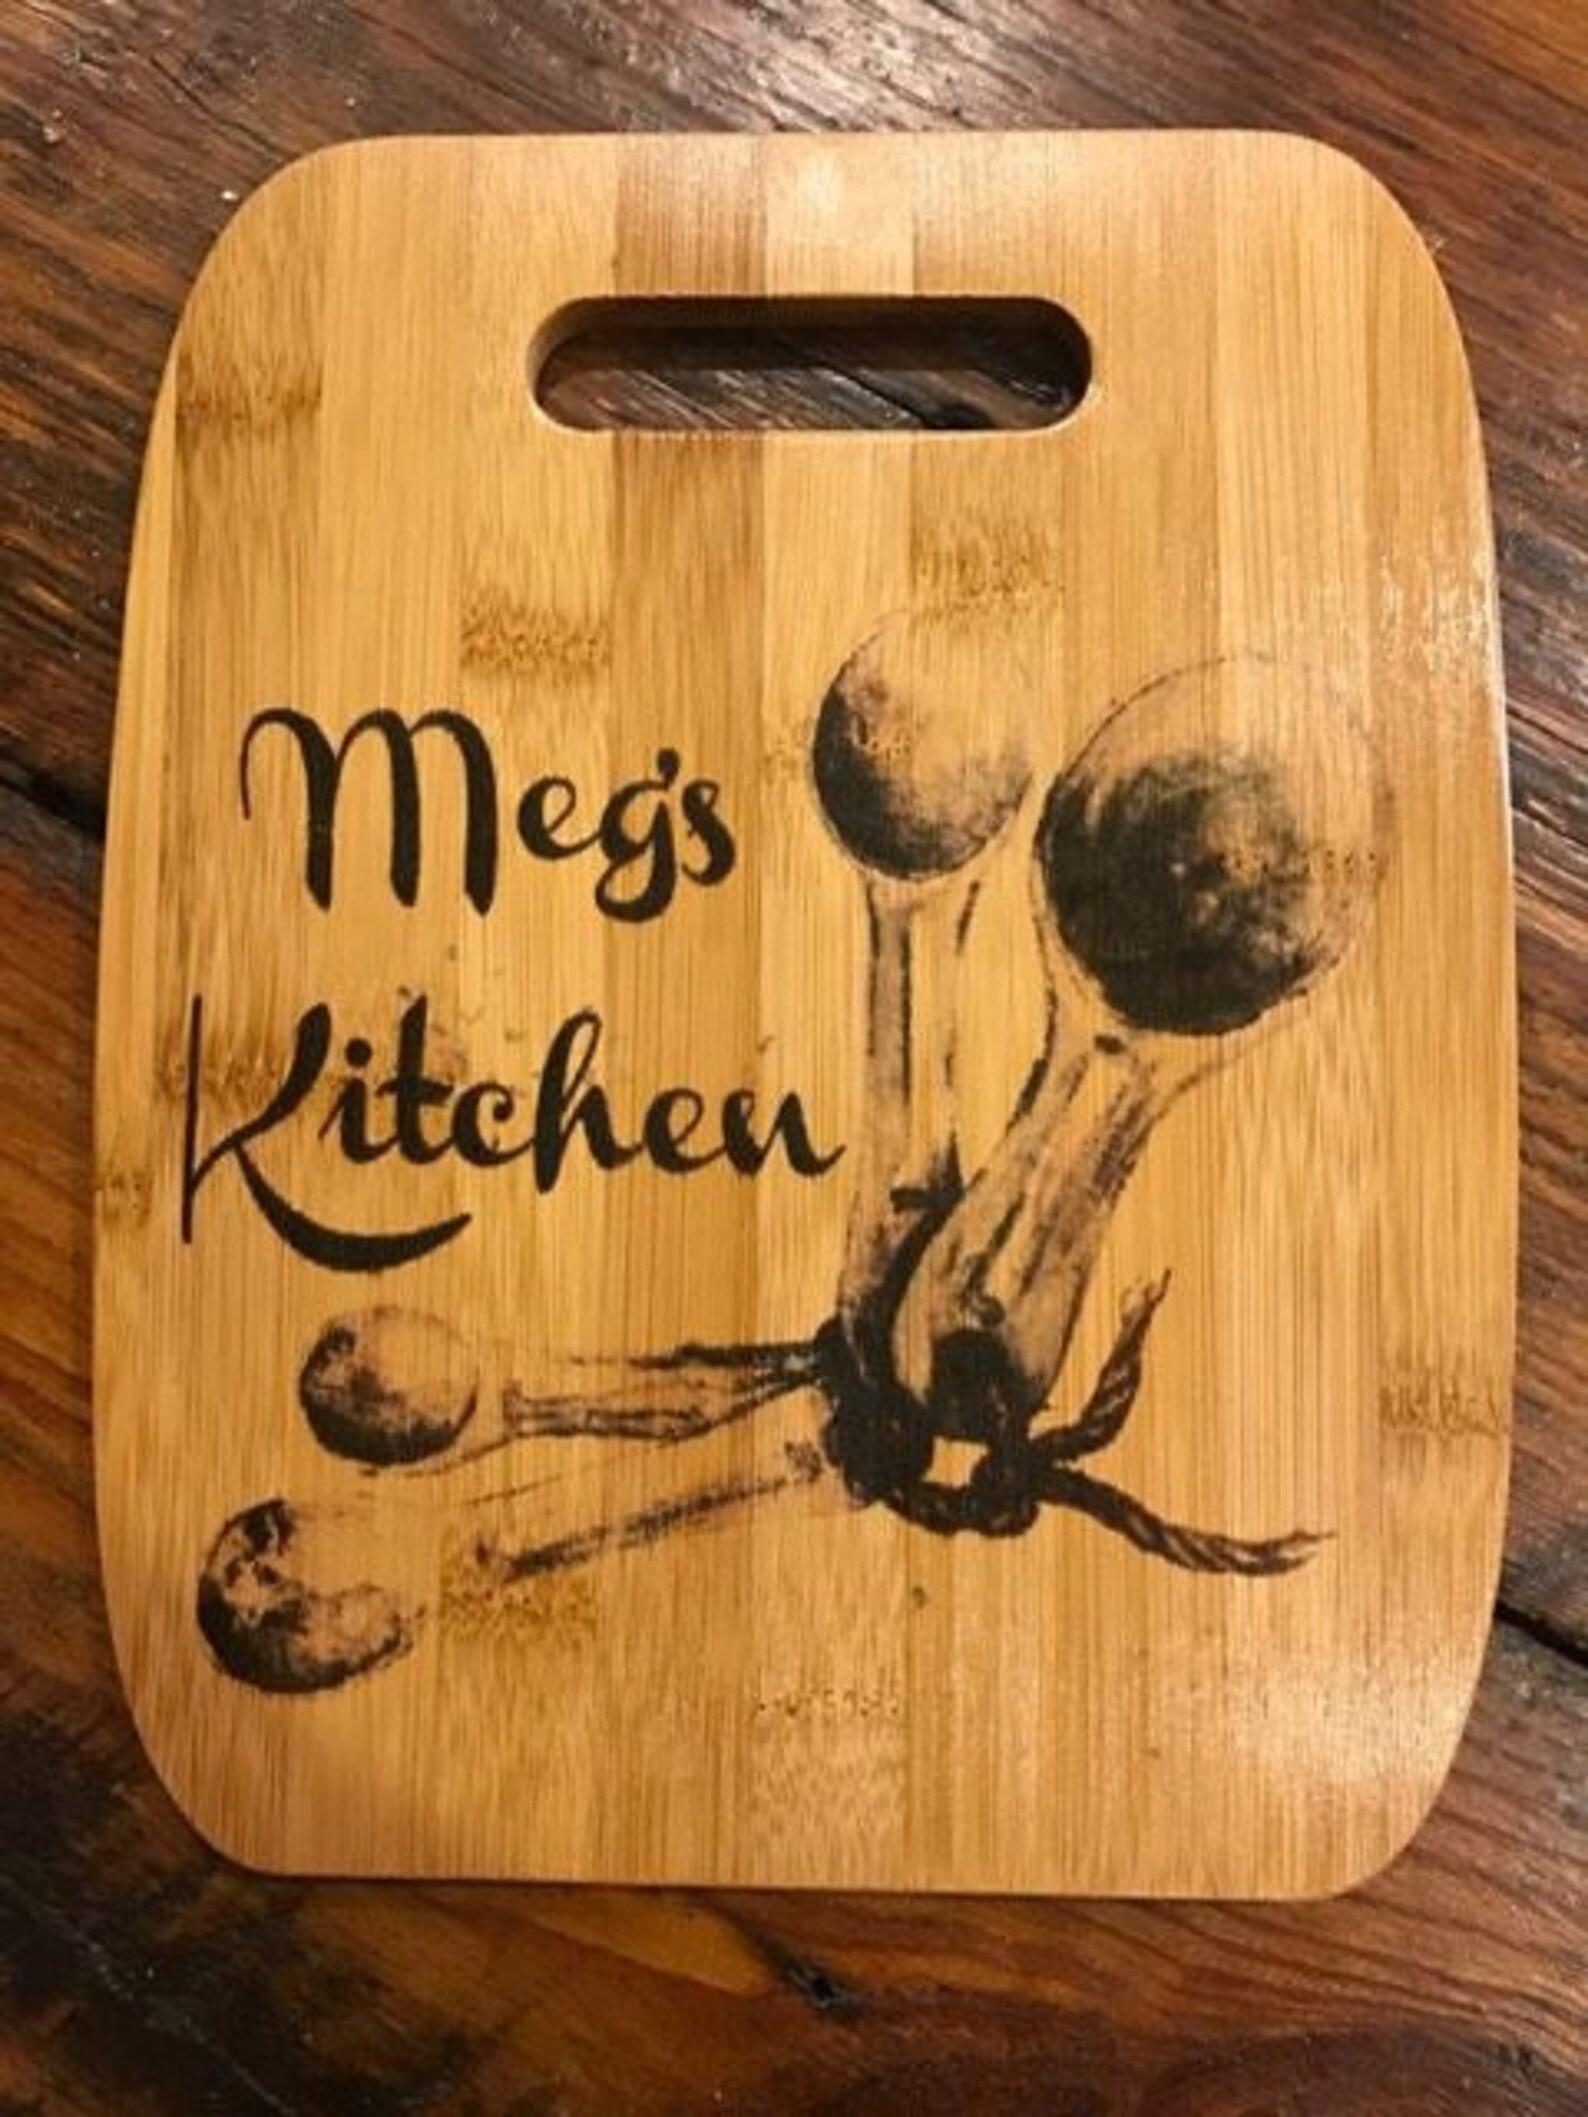 Meg's kitchen cutting board with utensils on it.